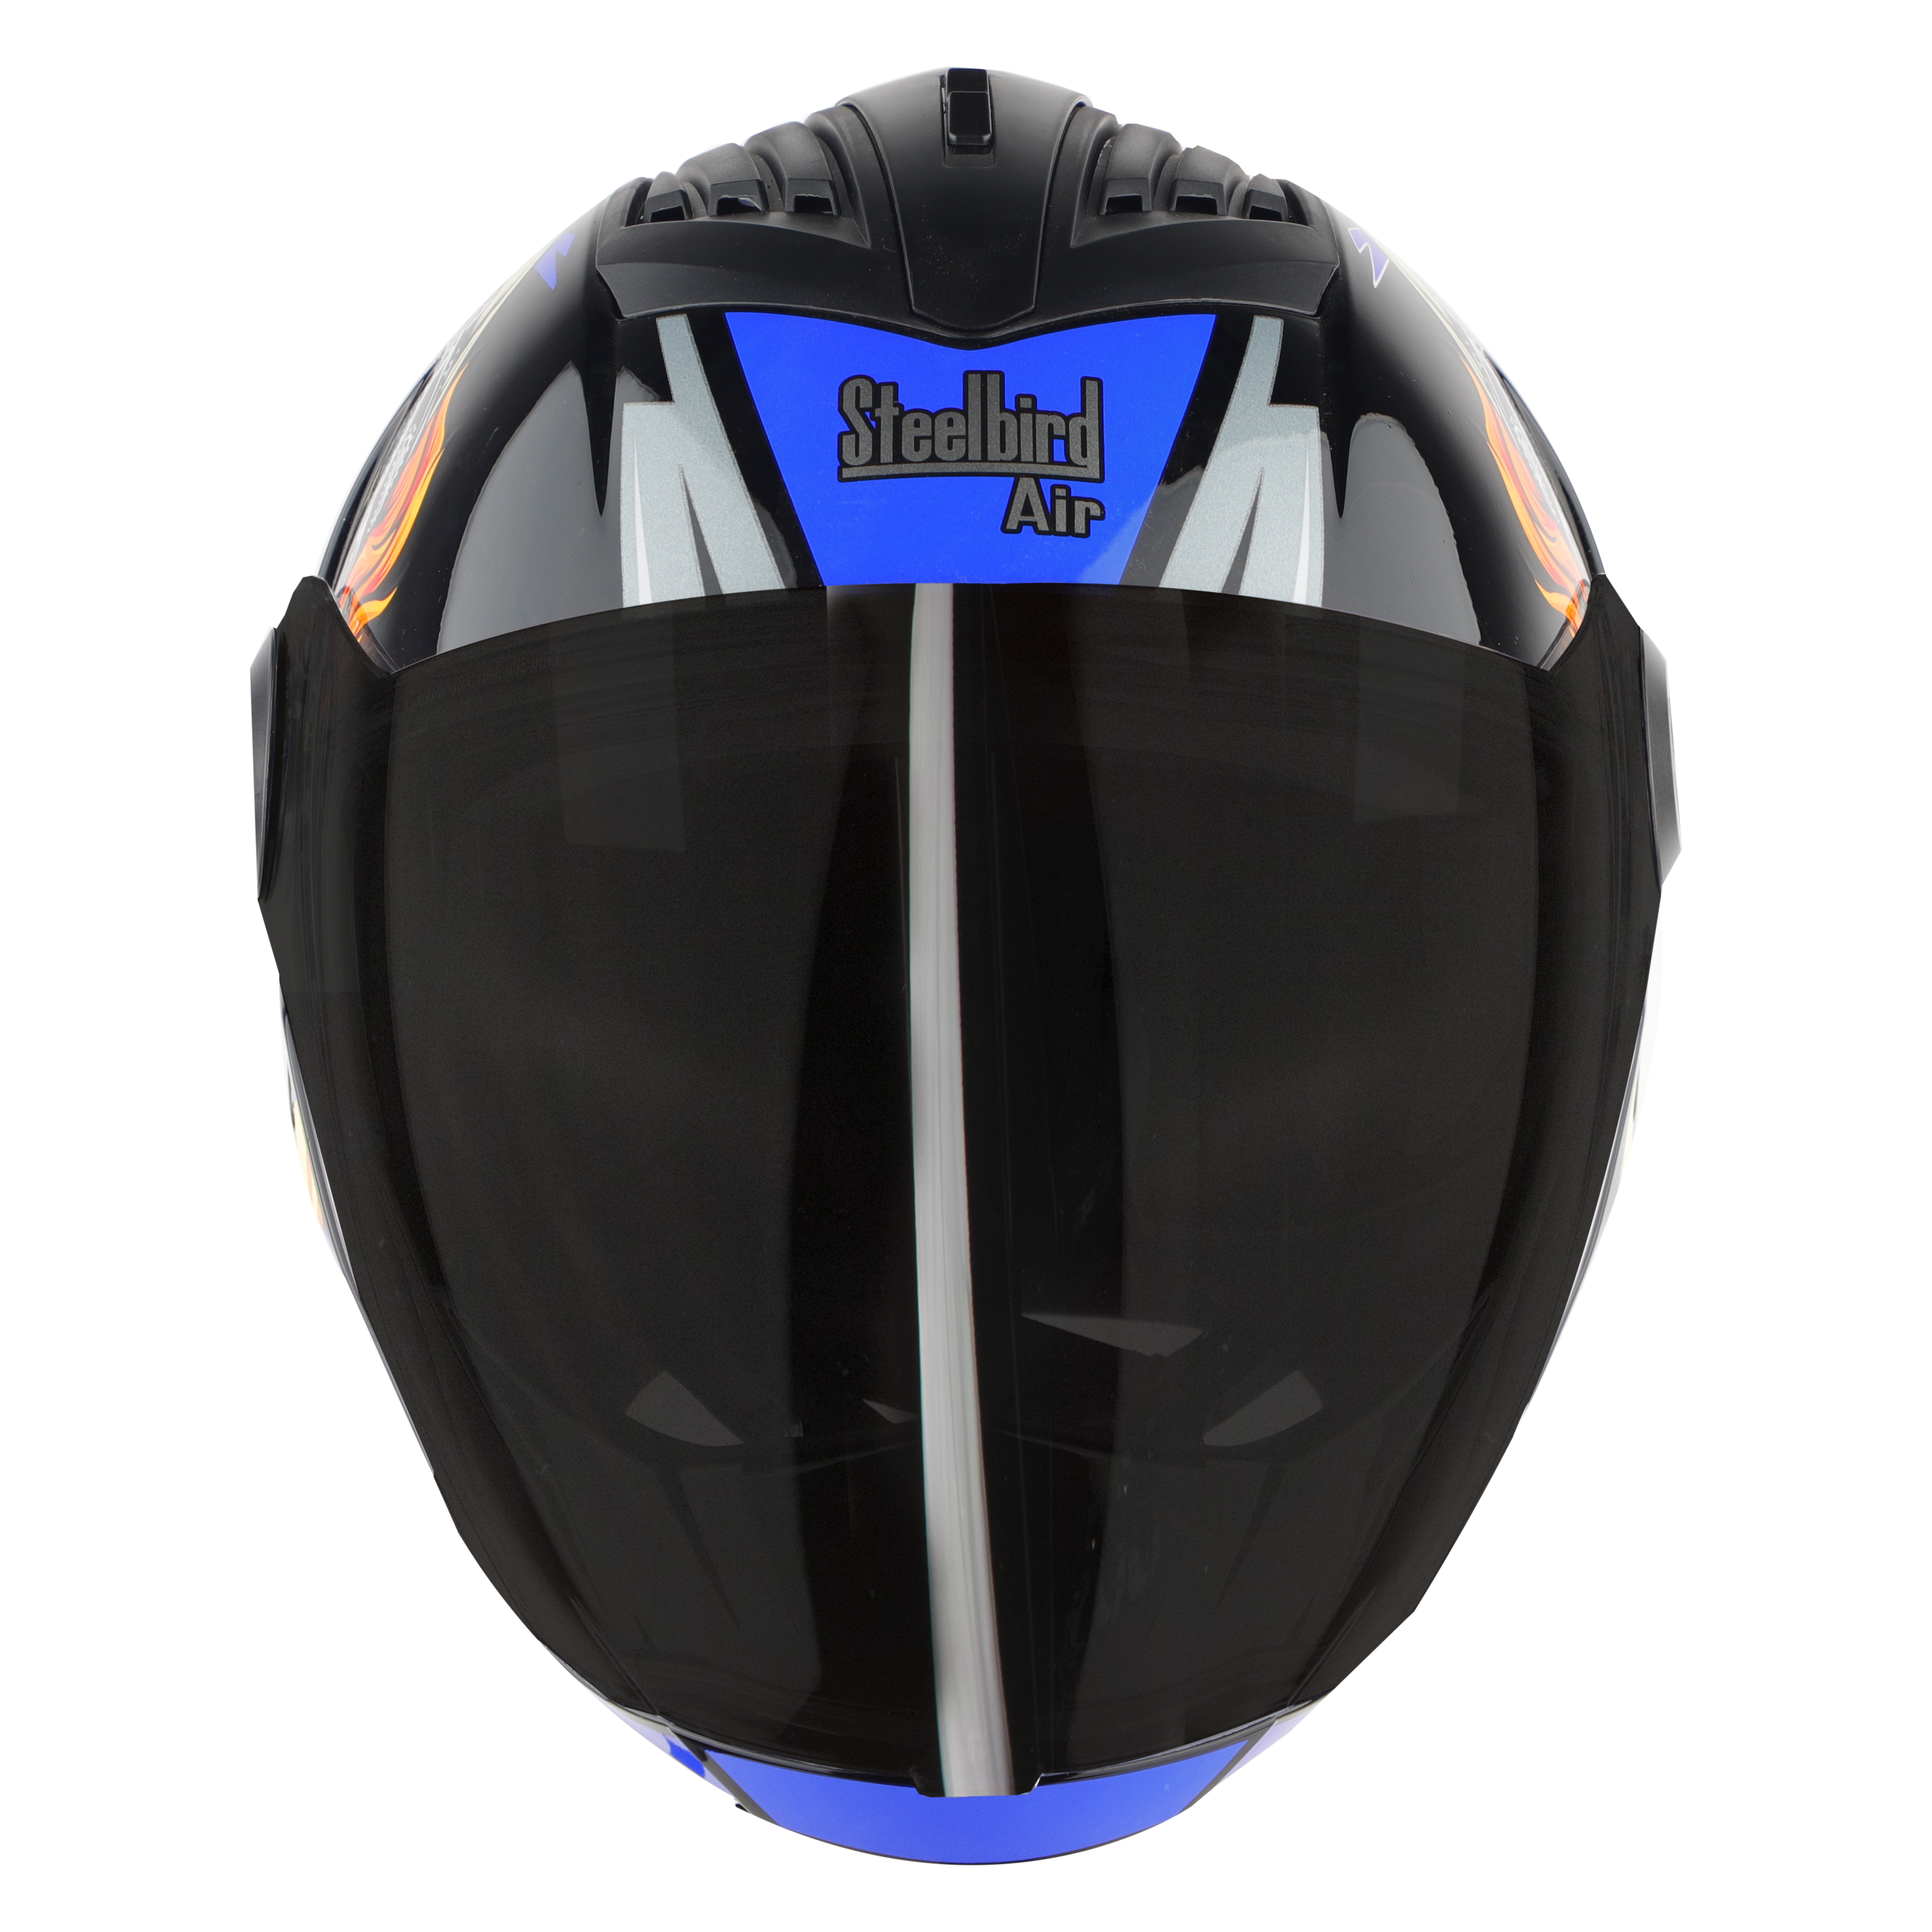 SBA-2 SPOOK MAT BLACK WITH BLUE ( FITTED WITH CLEAR VISOR EXTRA SMOKE VISOR FREE